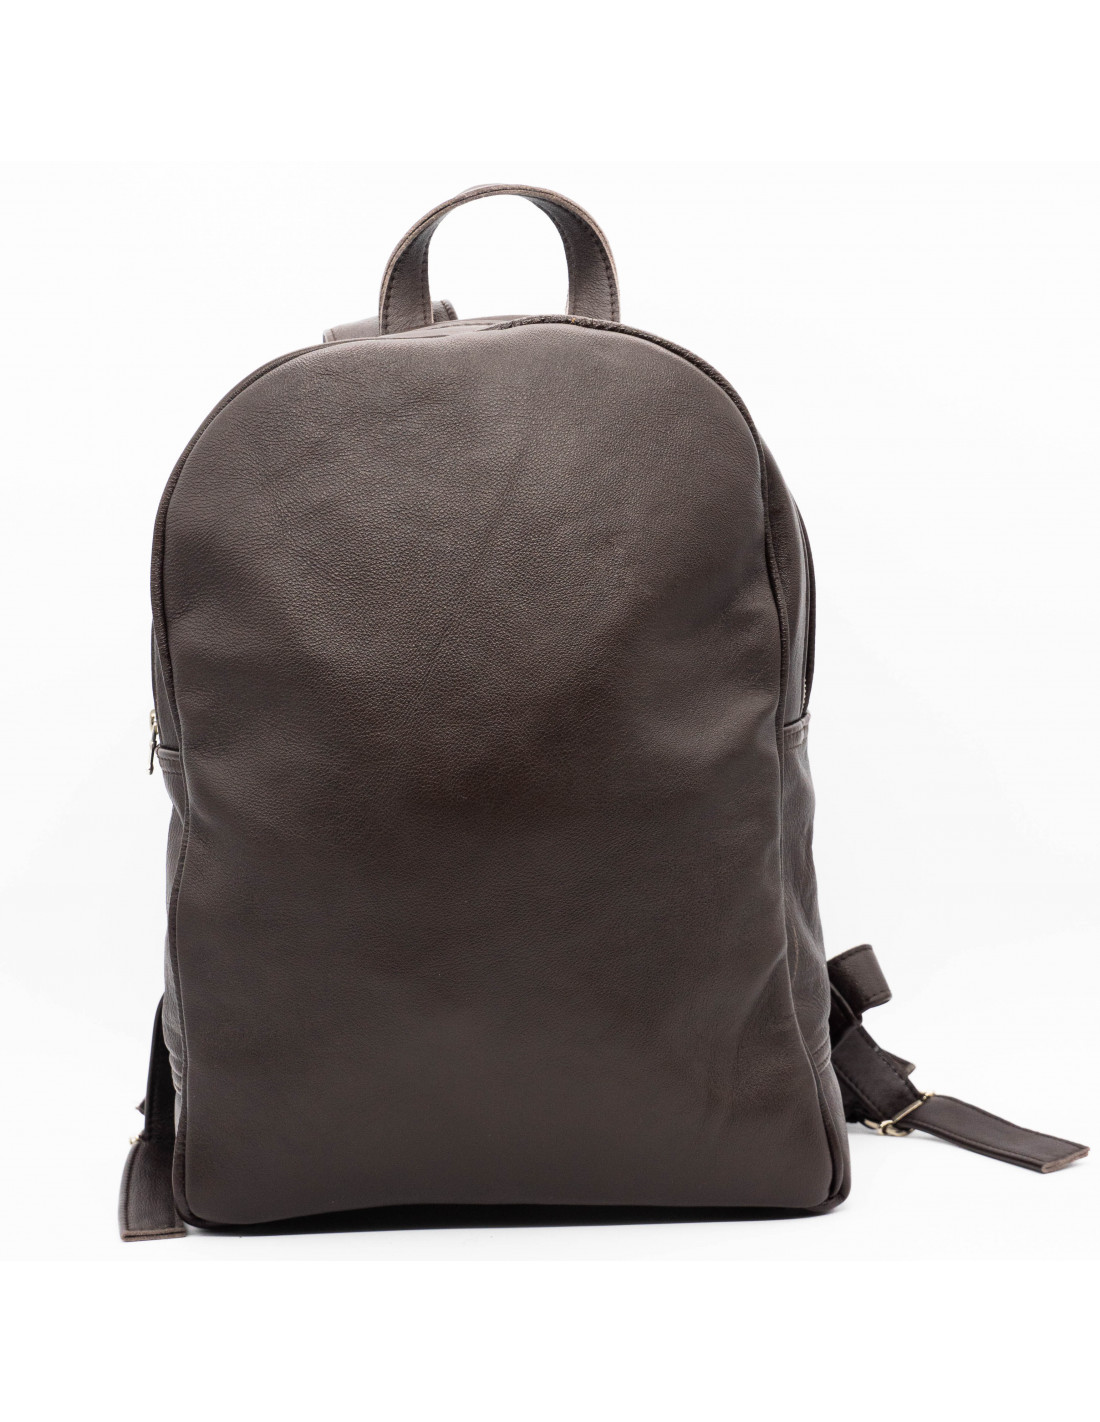 Bespoke 'HH' Metal Initials Dark Brown Leather Backpack with Embossed